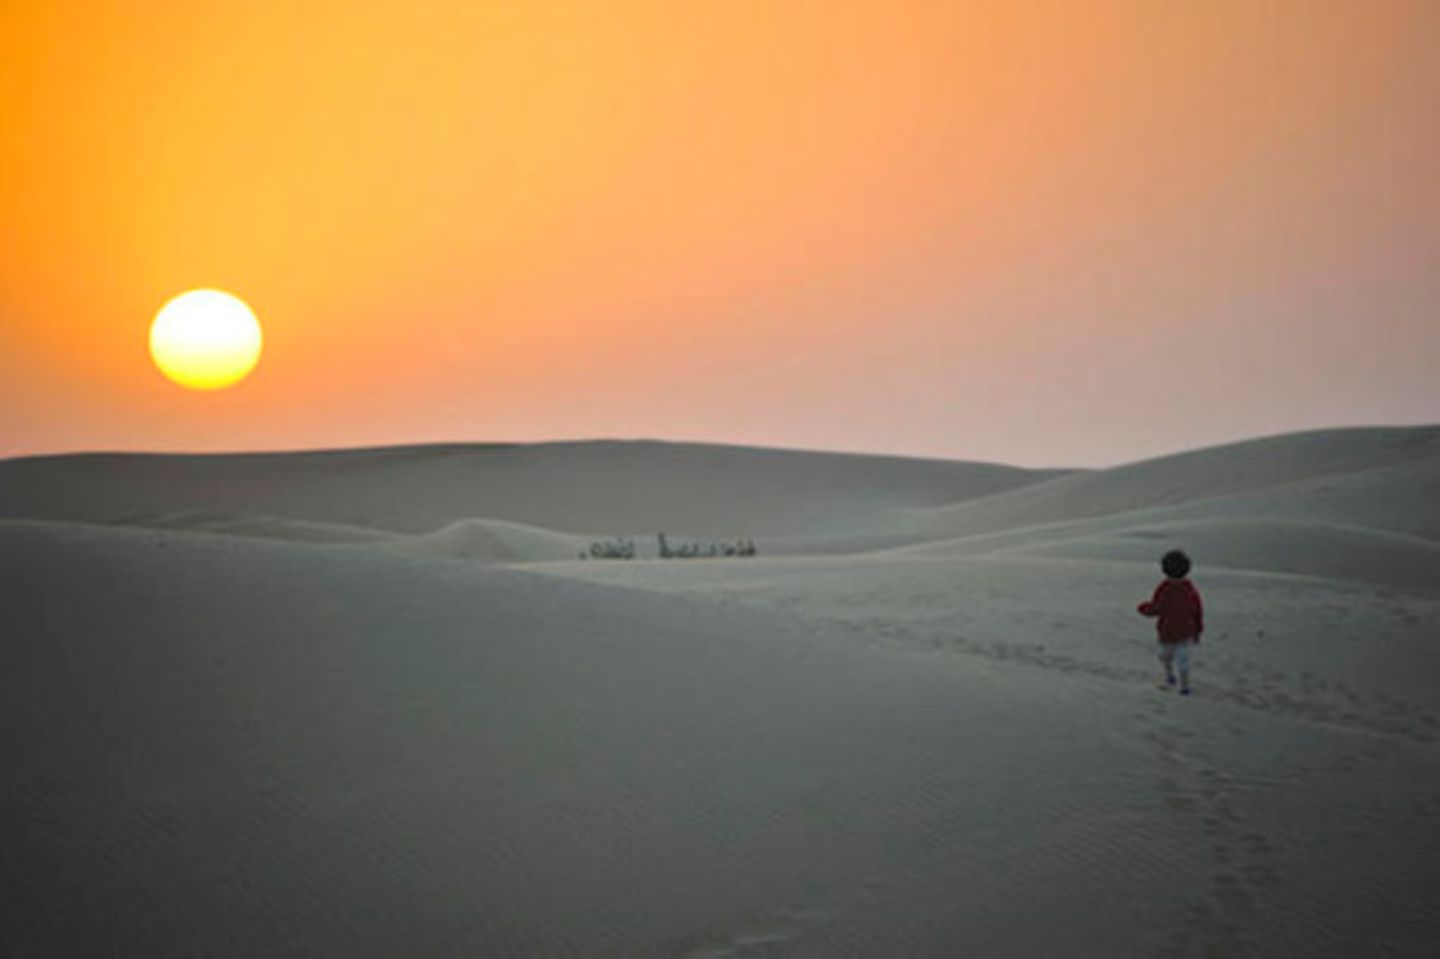 "Chasing the sun across the Great That Desert", Indien.